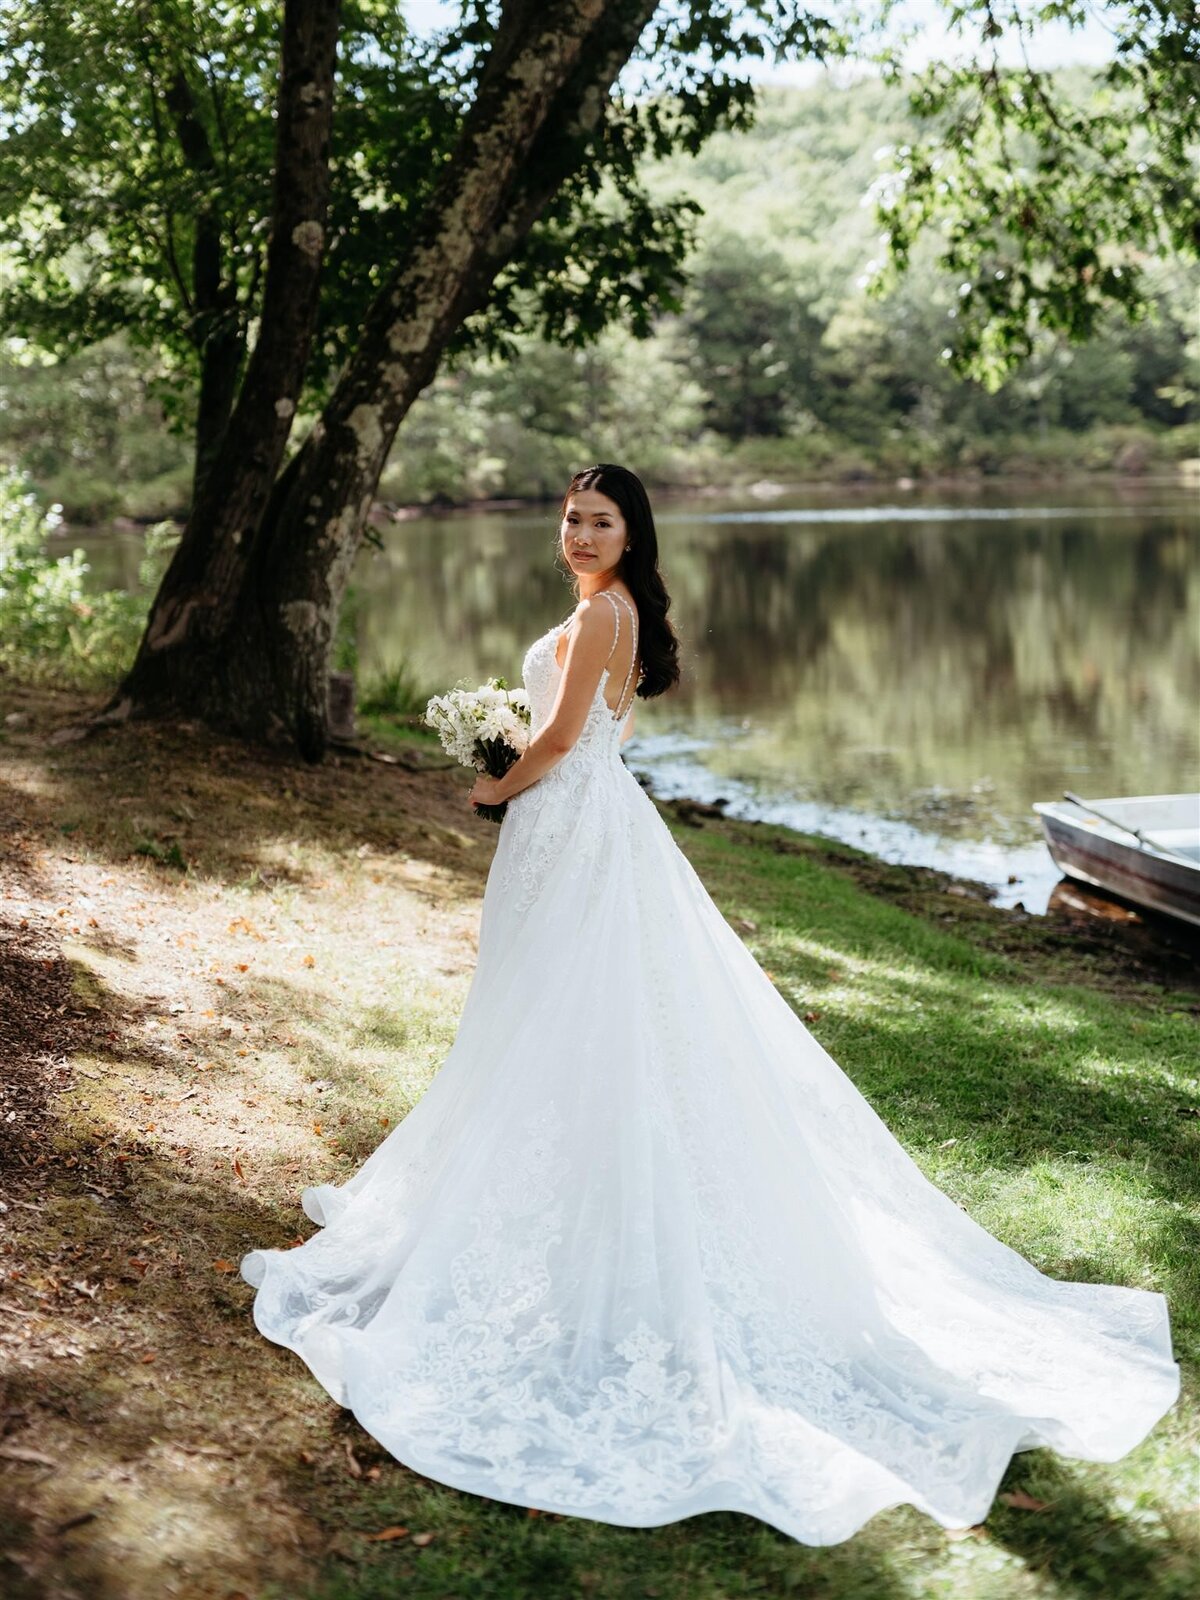 Bride poses for elegant portrait showing her dress, train, and bouquet under a tree, next to a rowboat in front of a lake and wooded area.